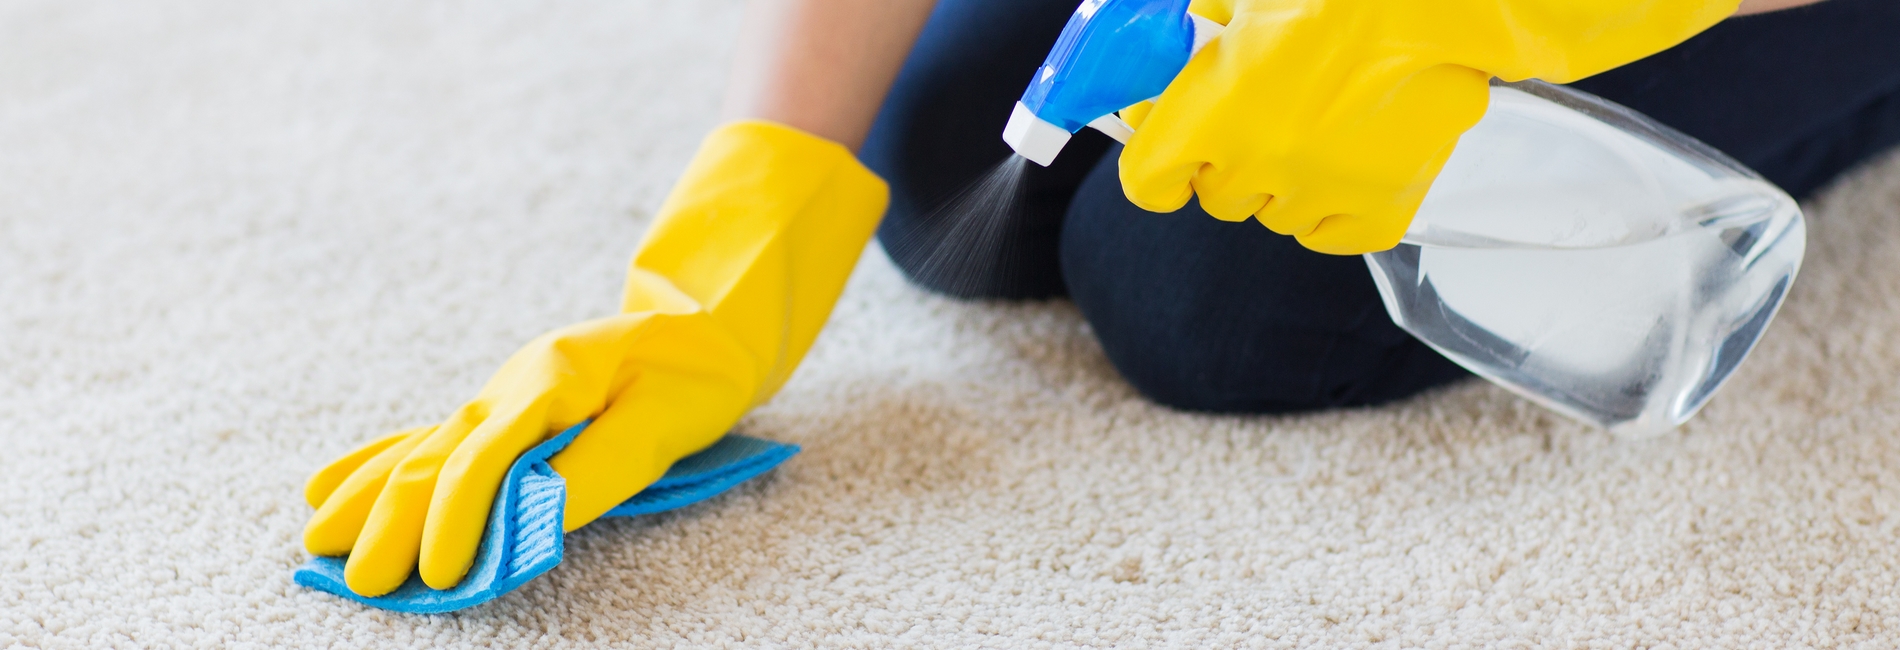 people, housework and housekeeping concept - close up of woman in rubber gloves with cloth and detergent spray cleaning carpet at home